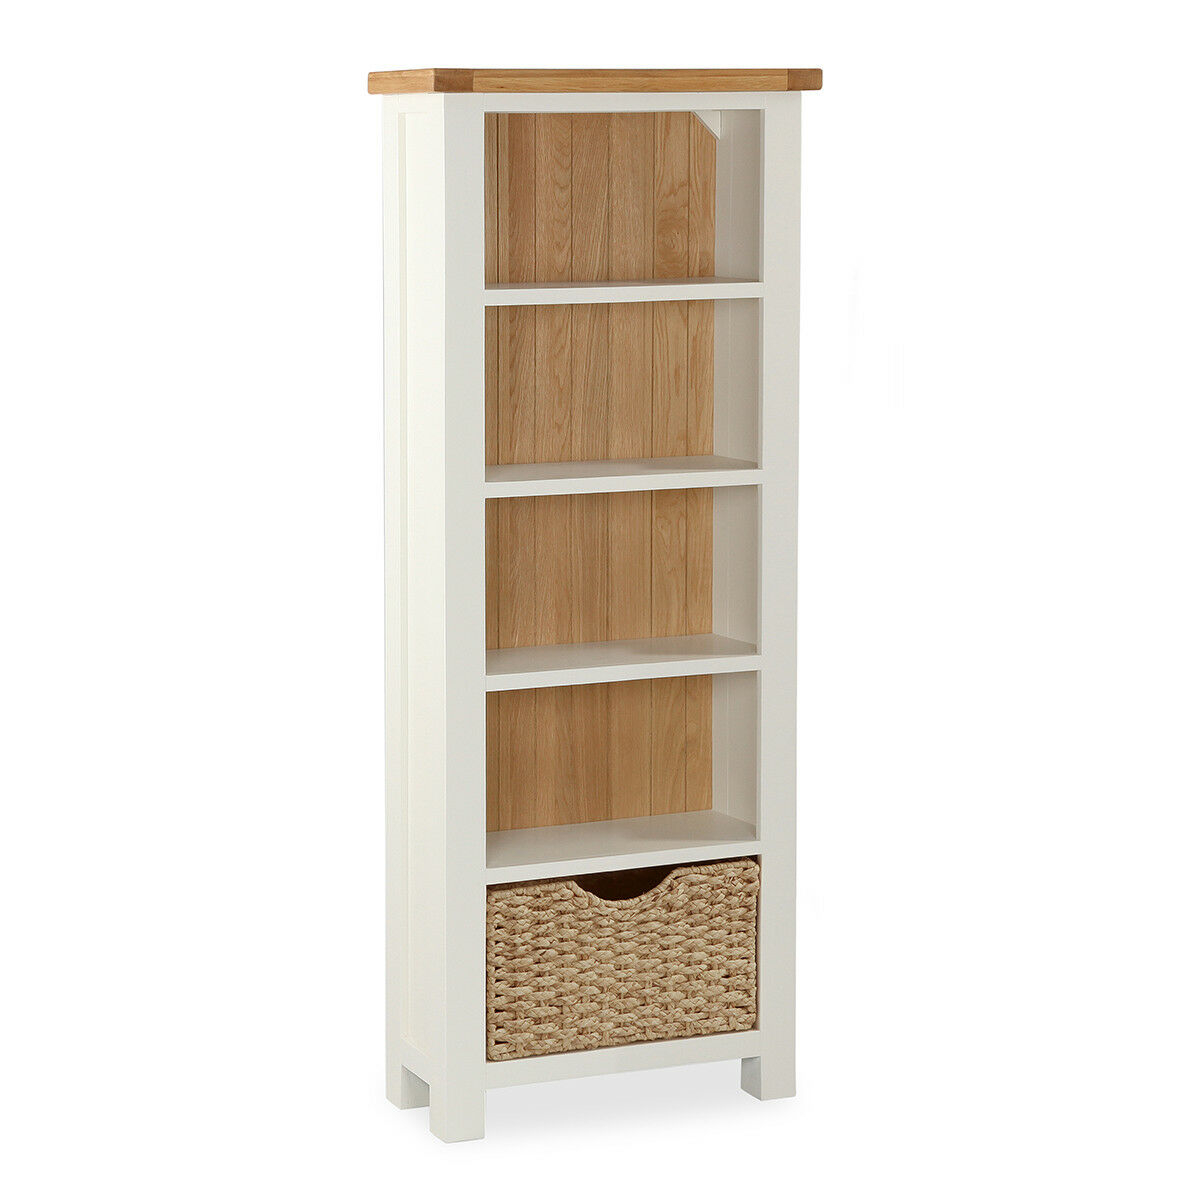 Details About Hampshire Cream Painted Oak Top Tall Slim Bookcase With Storage Basket throughout measurements 1200 X 1200